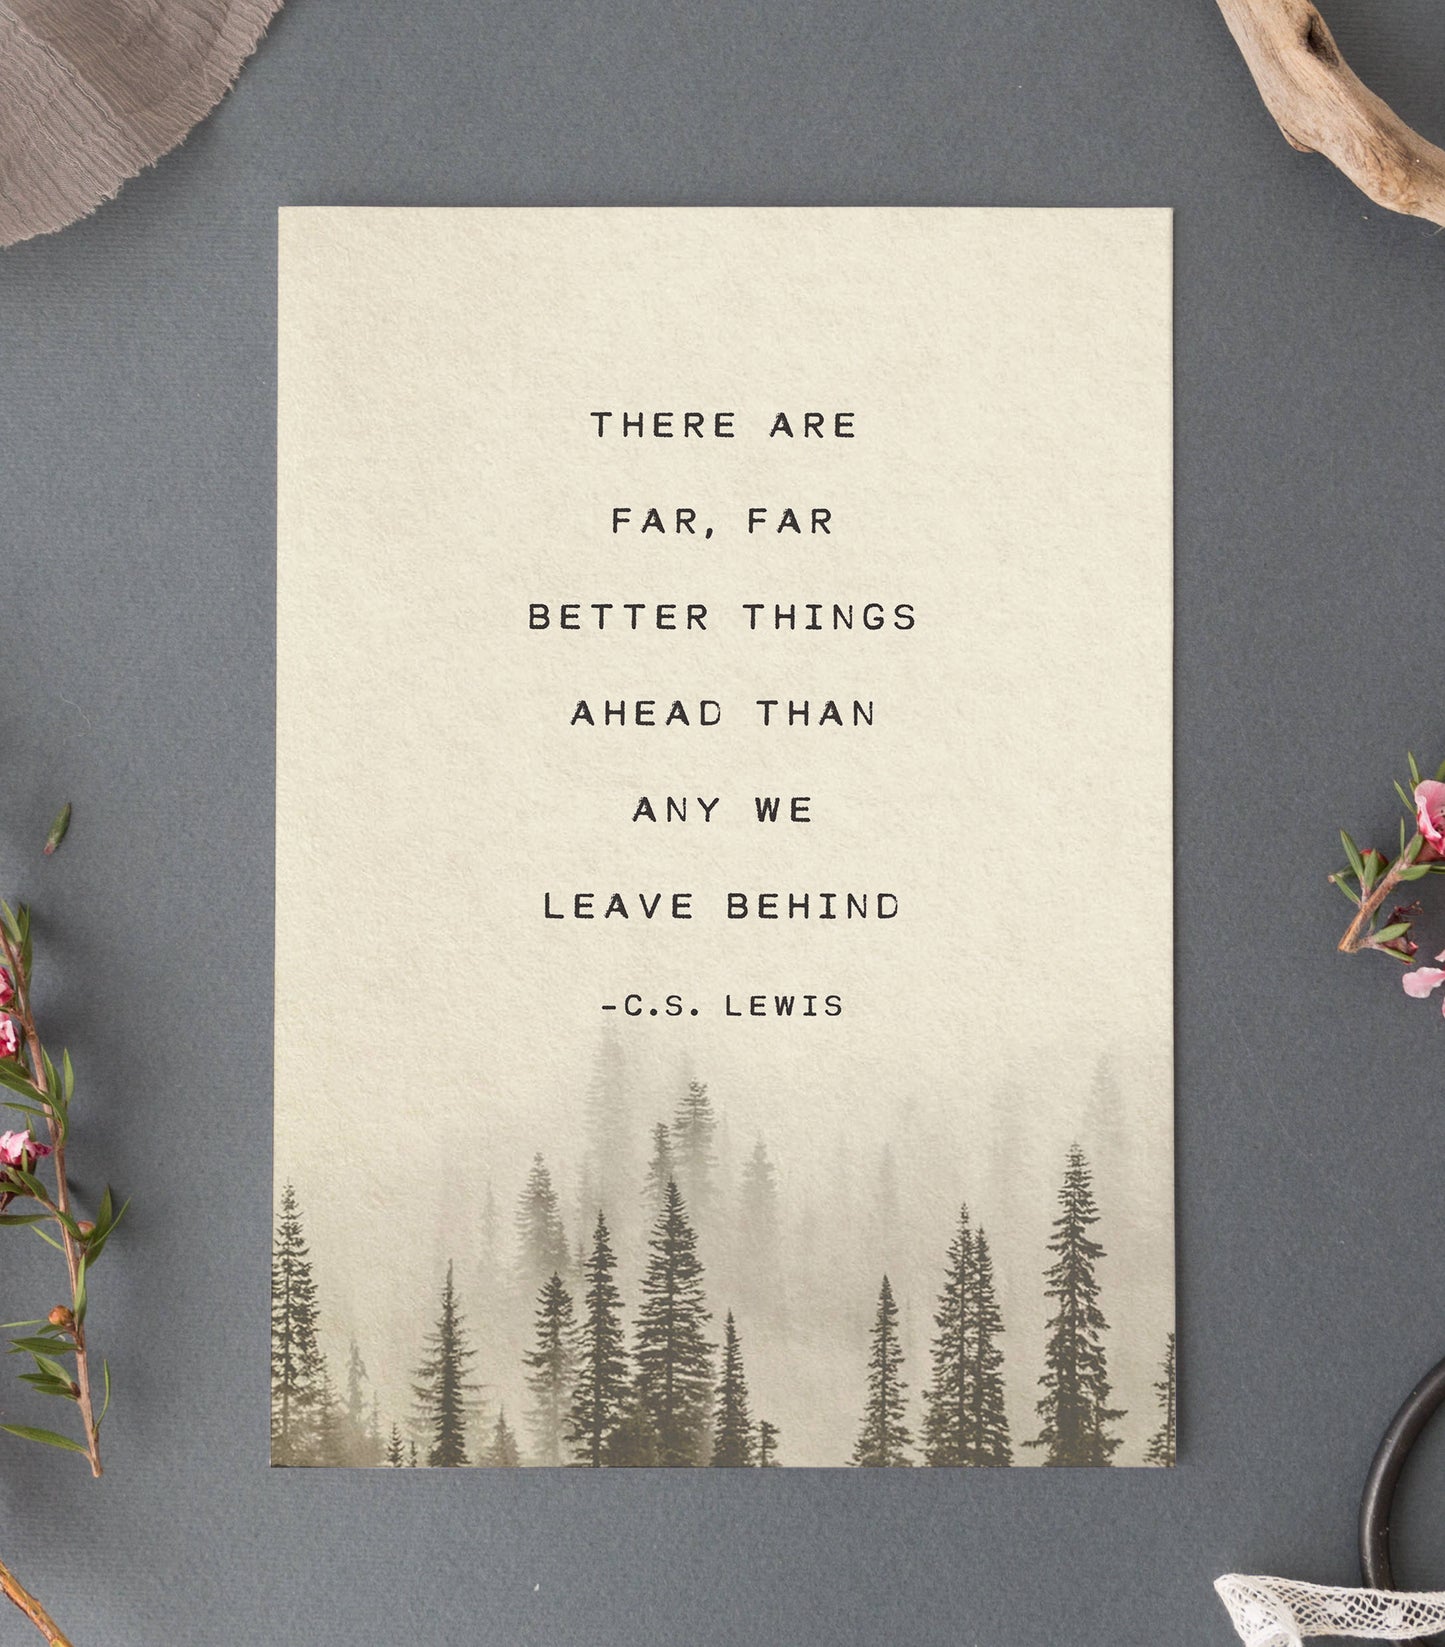 C.S. Lewis quote, there are far far better things ahead than any we leave behind